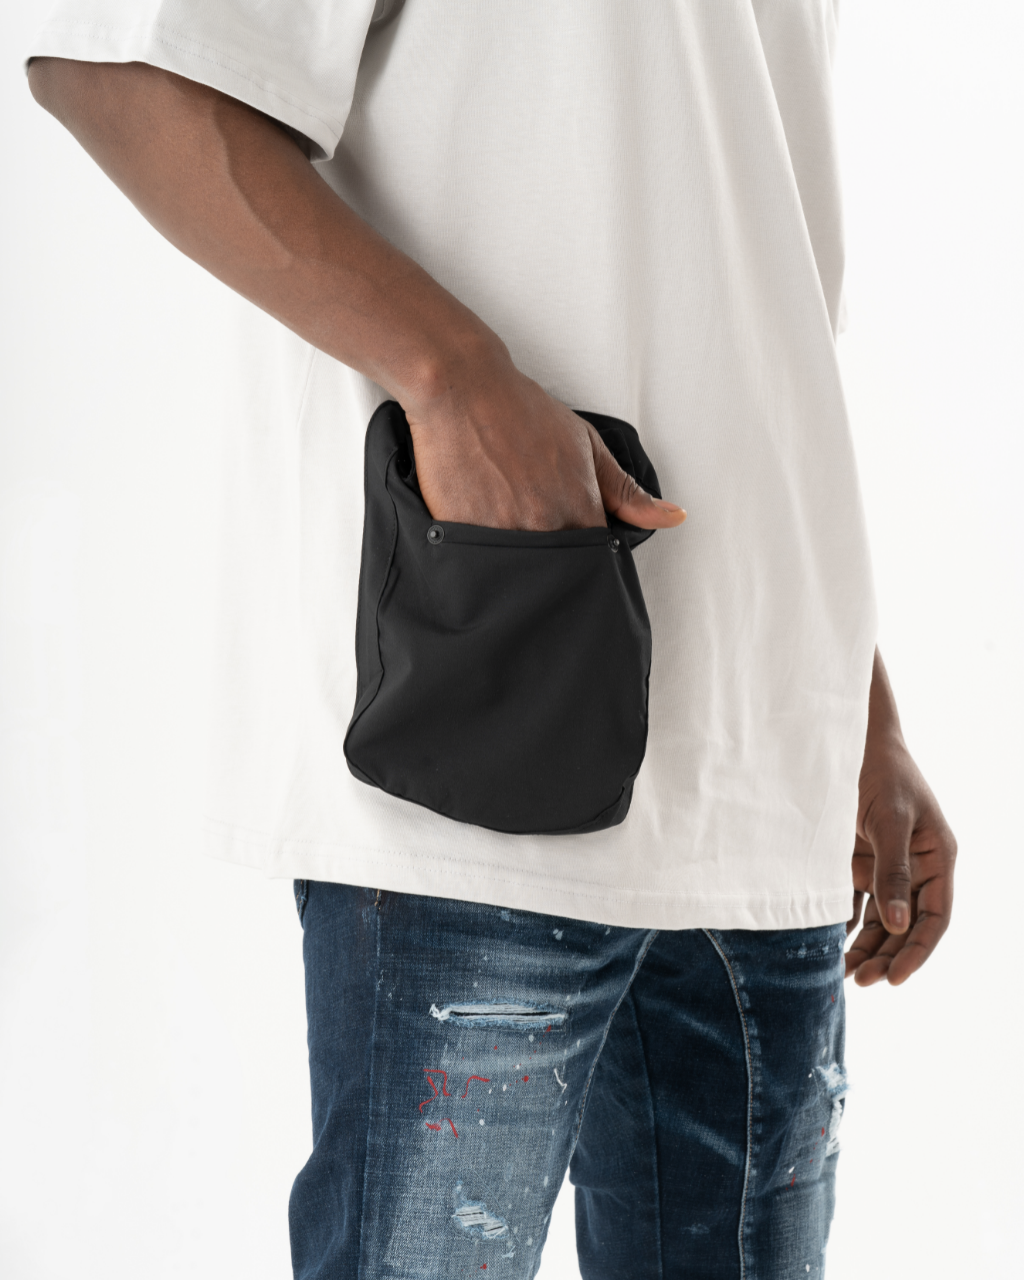 A man wearing an ELEVATE T-SHIRT and jeans holding a black pocket pouch.